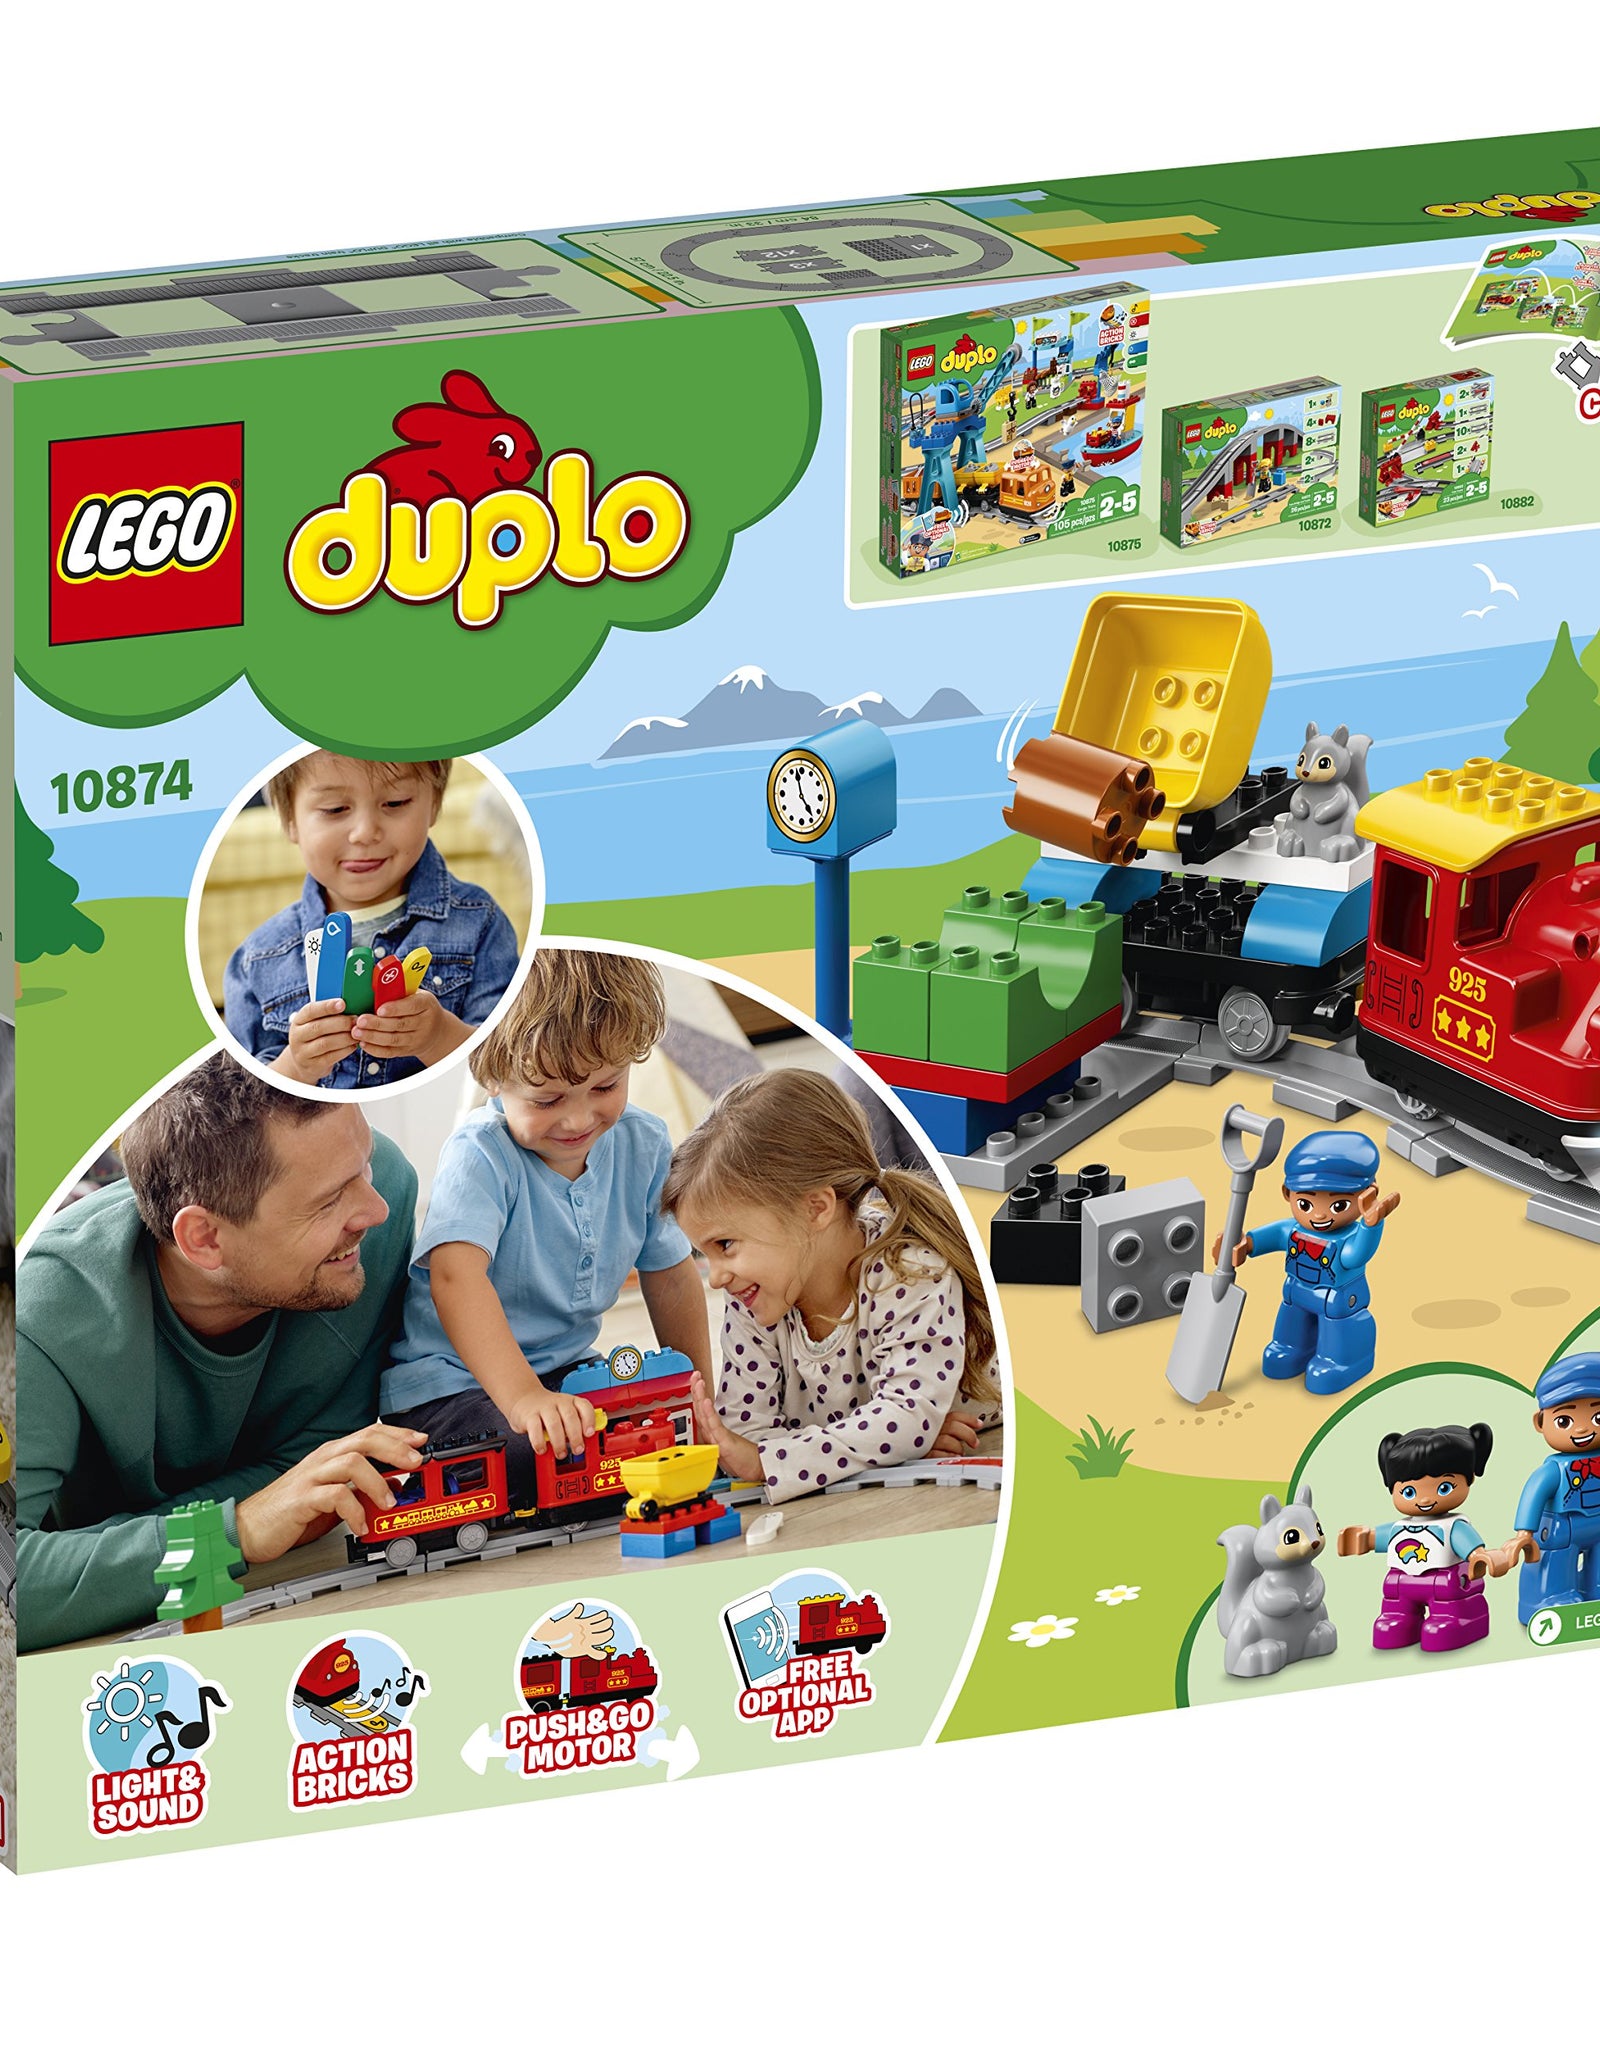 LEGO DUPLO Steam Train 10874 Remote-Control Building Blocks Set Helps Toddlers Learn, Great Educational Birthday Gift (59 Pieces)